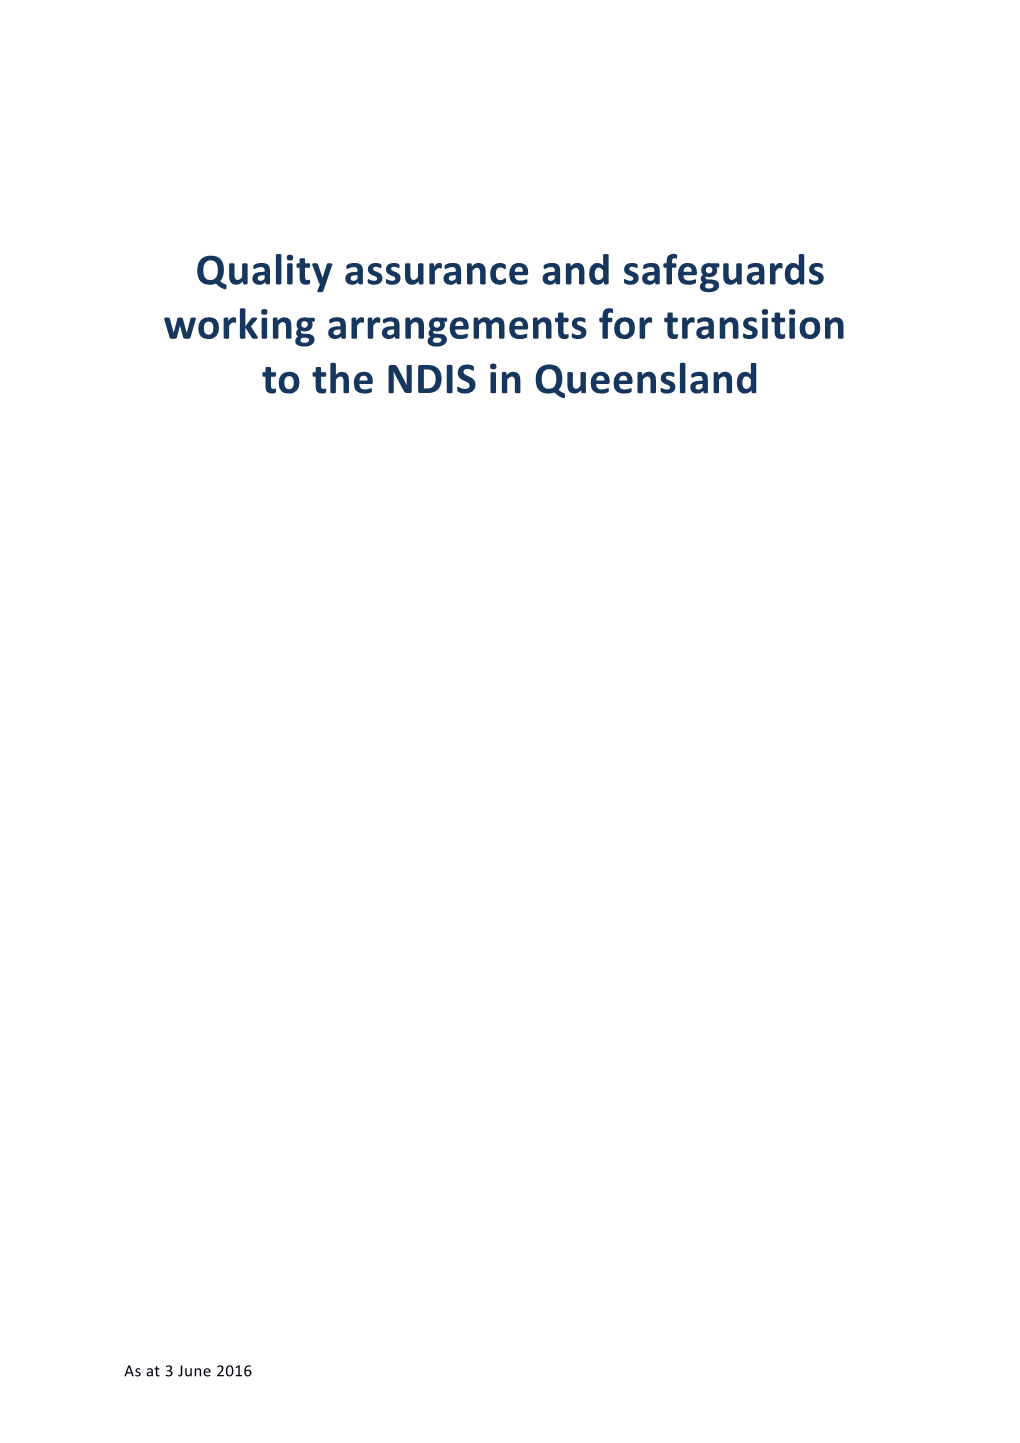 Quality Assurance and Safeguards Working Arrangements for the Launch of the NDIS in Victoria